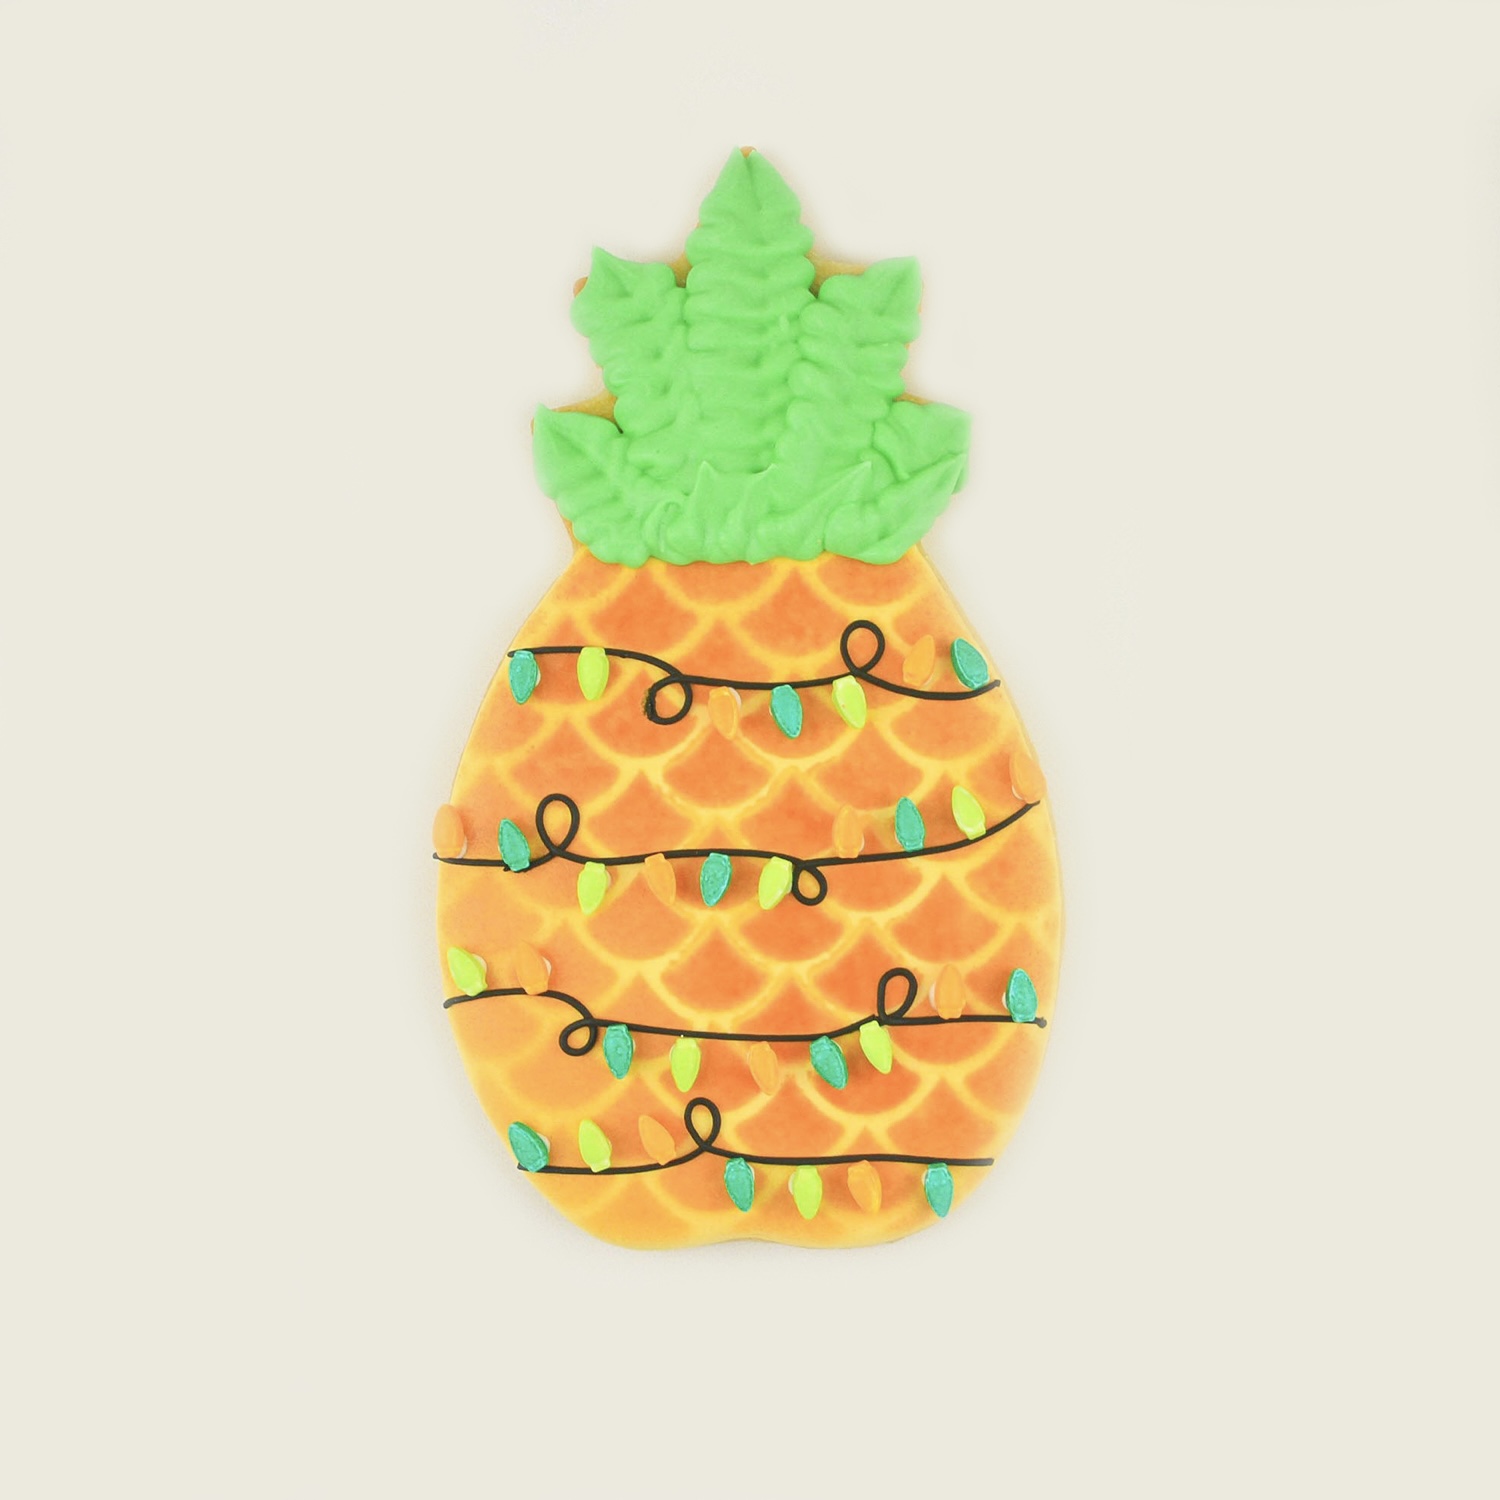 Pineapple Royal Icing Cookie with airbrushed accents and adorned with Christmas lights